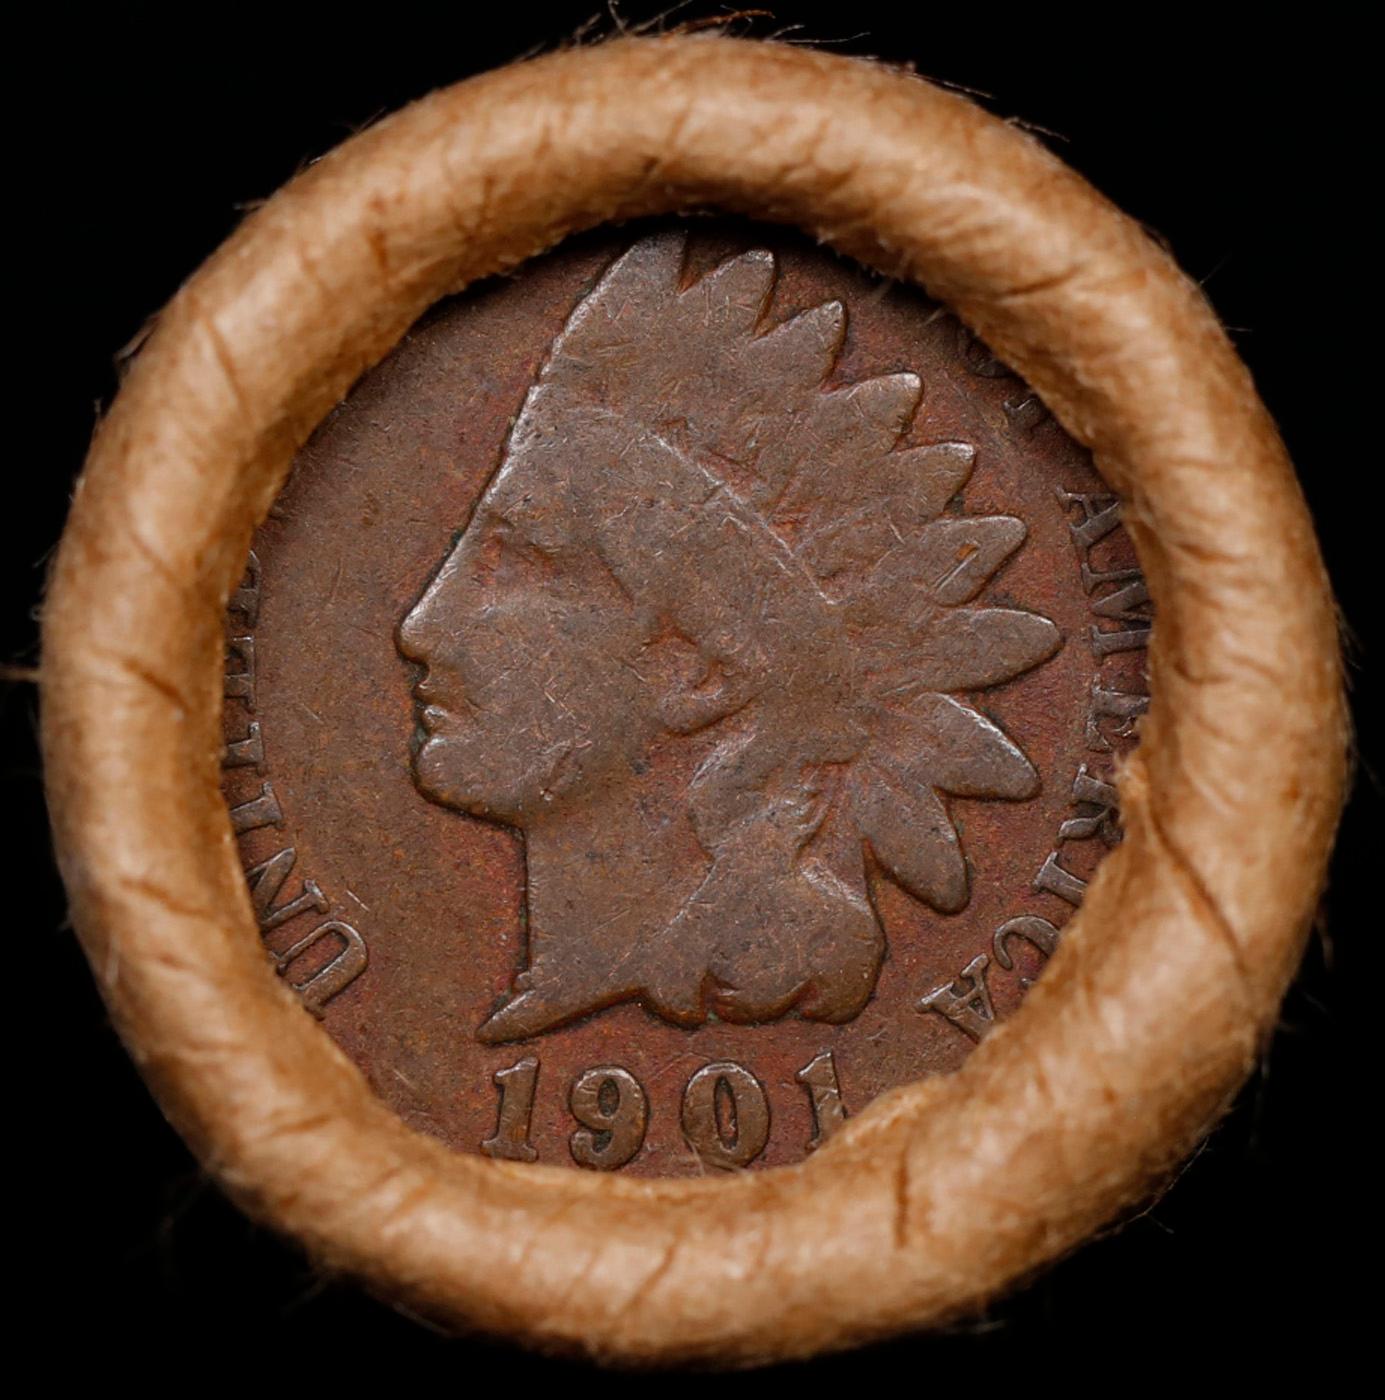 Lincoln Wheat Cent 1c Mixed Roll Orig Brandt McDonalds Wrapper, 1919-d end, 1901 Indian other end